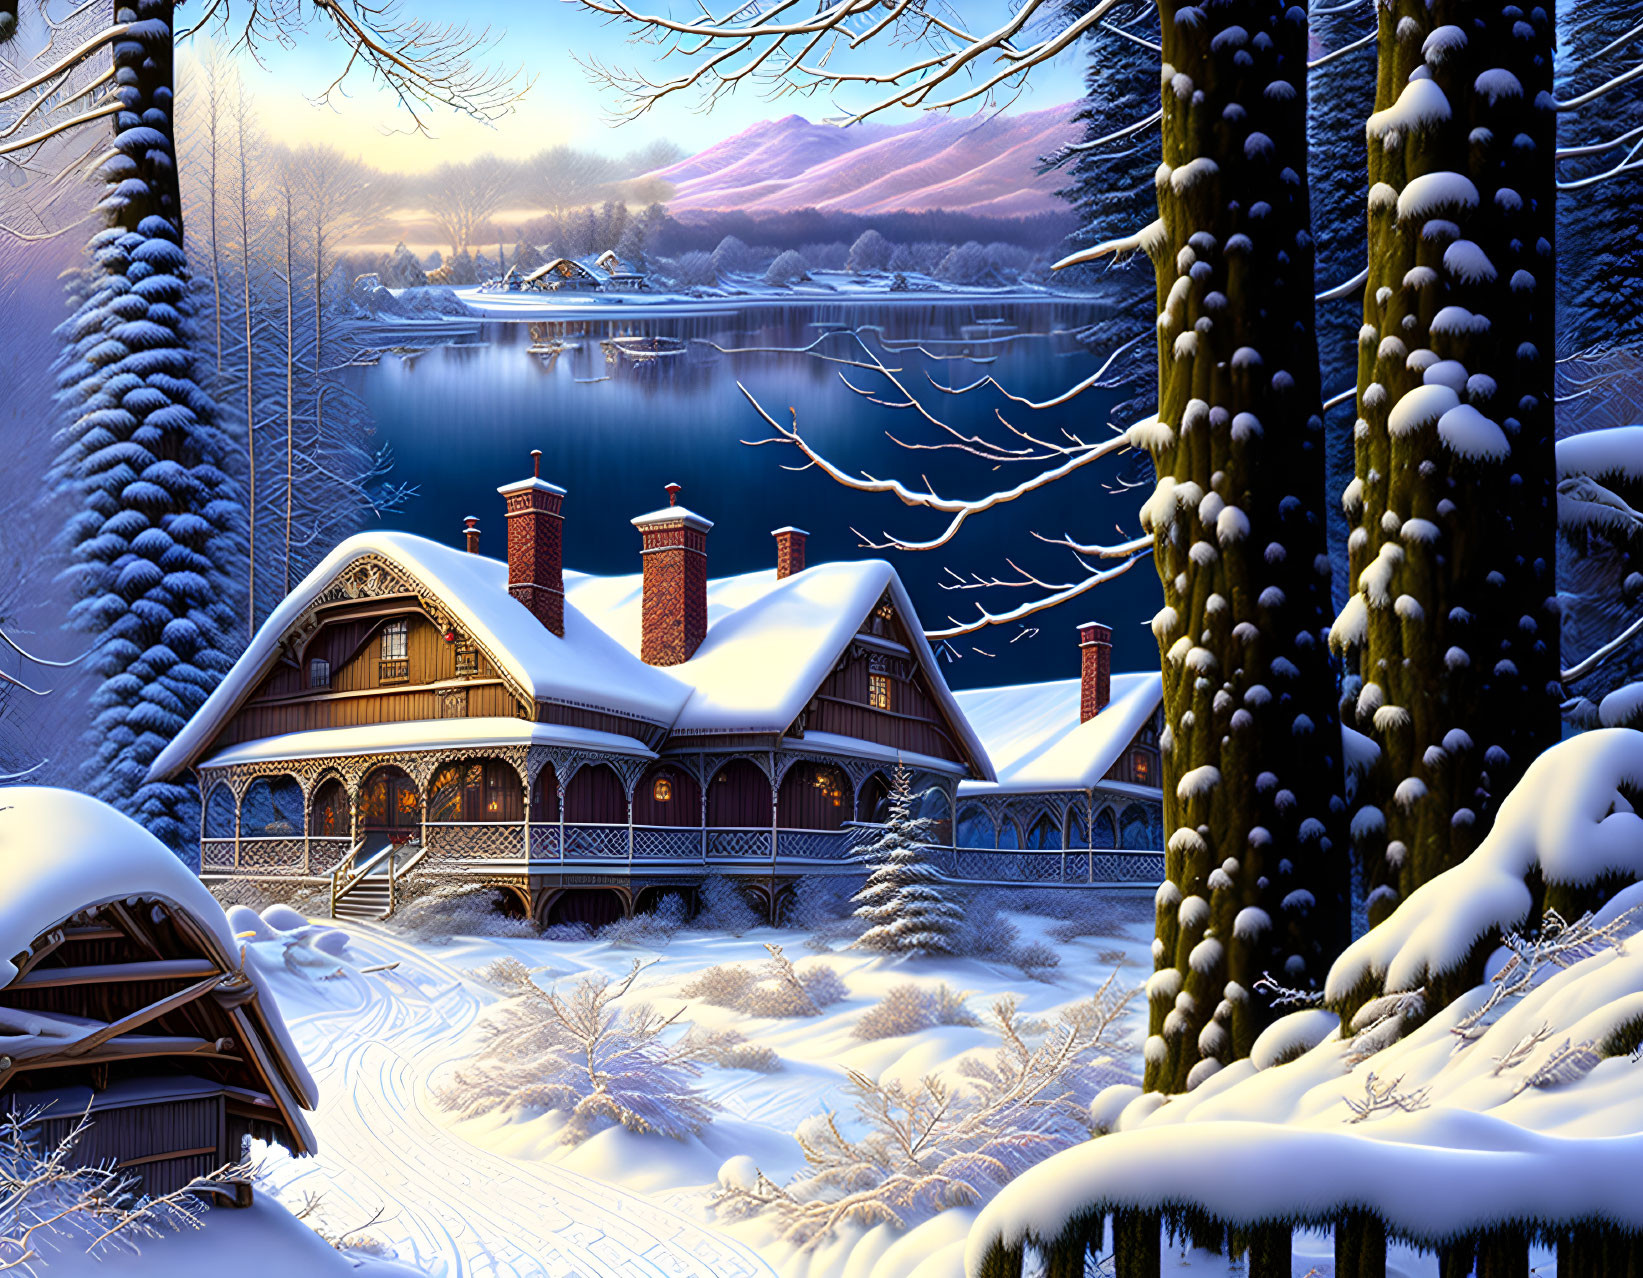 A Hyperrealistic and Intricate Winter Landscape